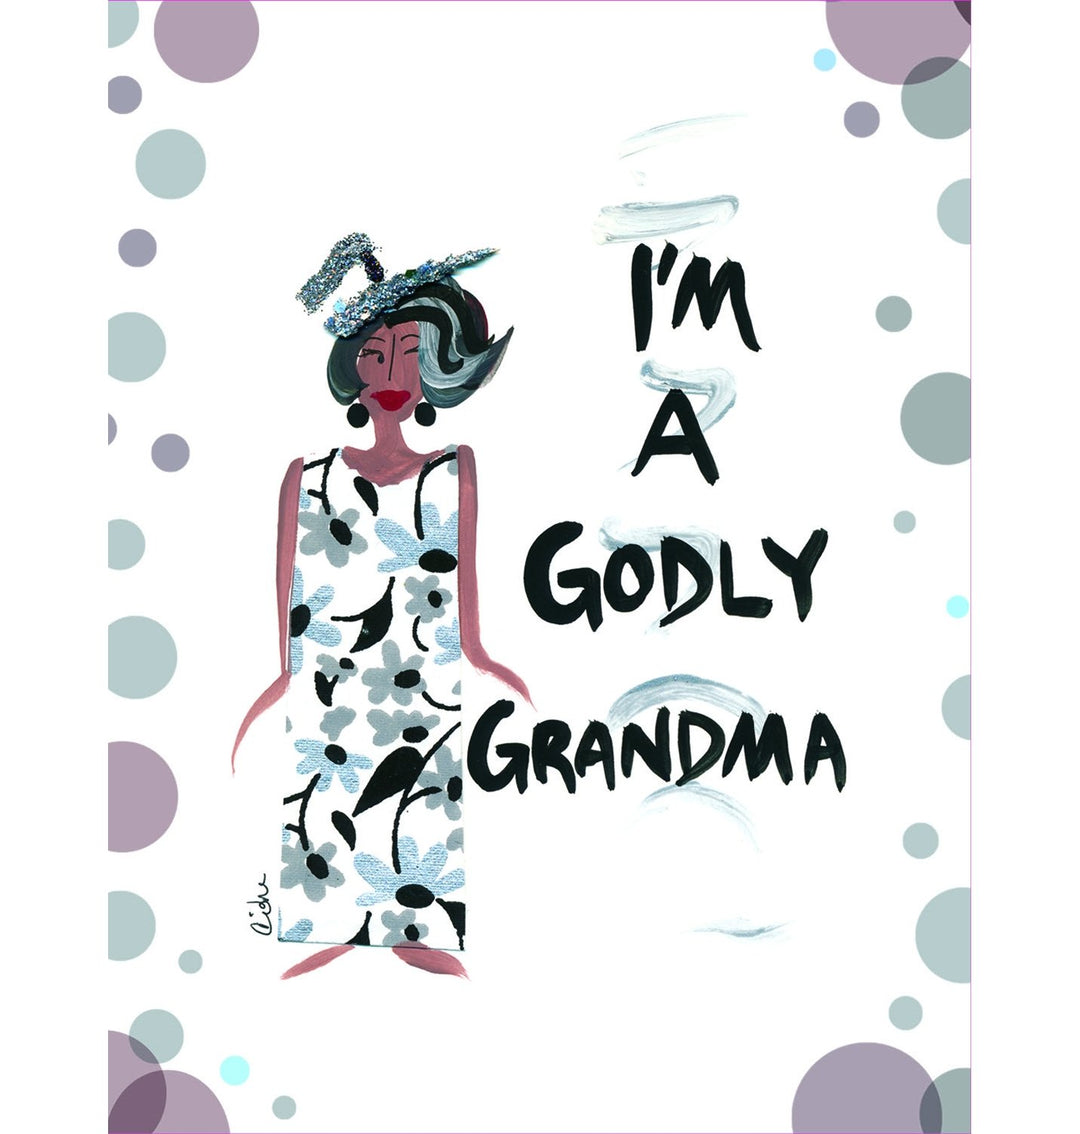 Godly Grandma: African American Note Cards by Cidne Wallace